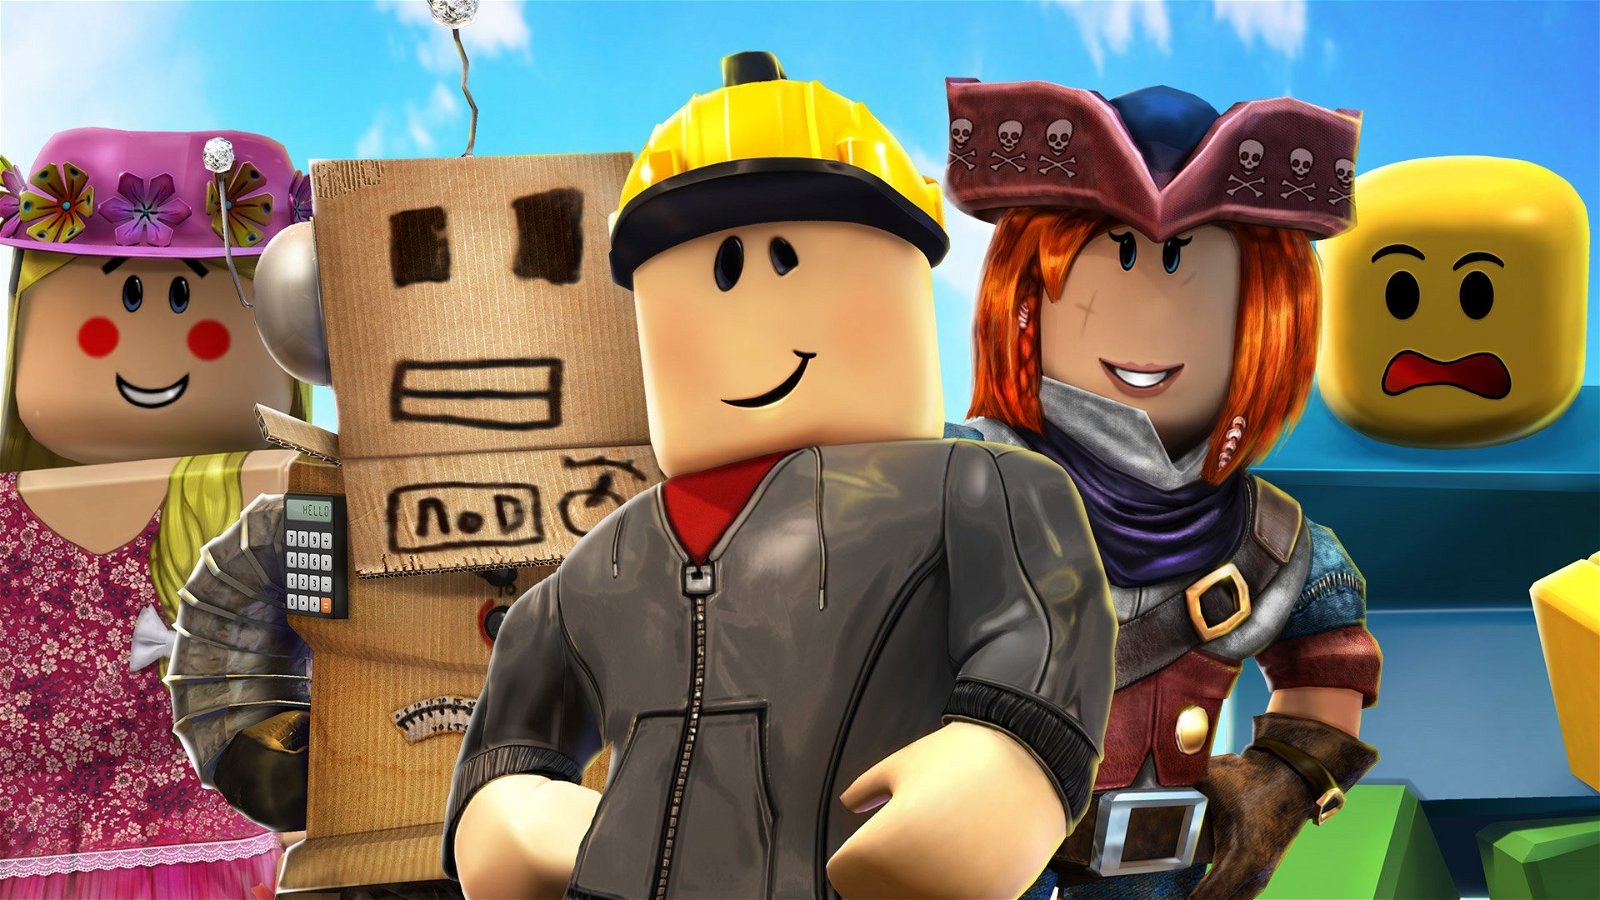 Roblox adds new content to help people create games